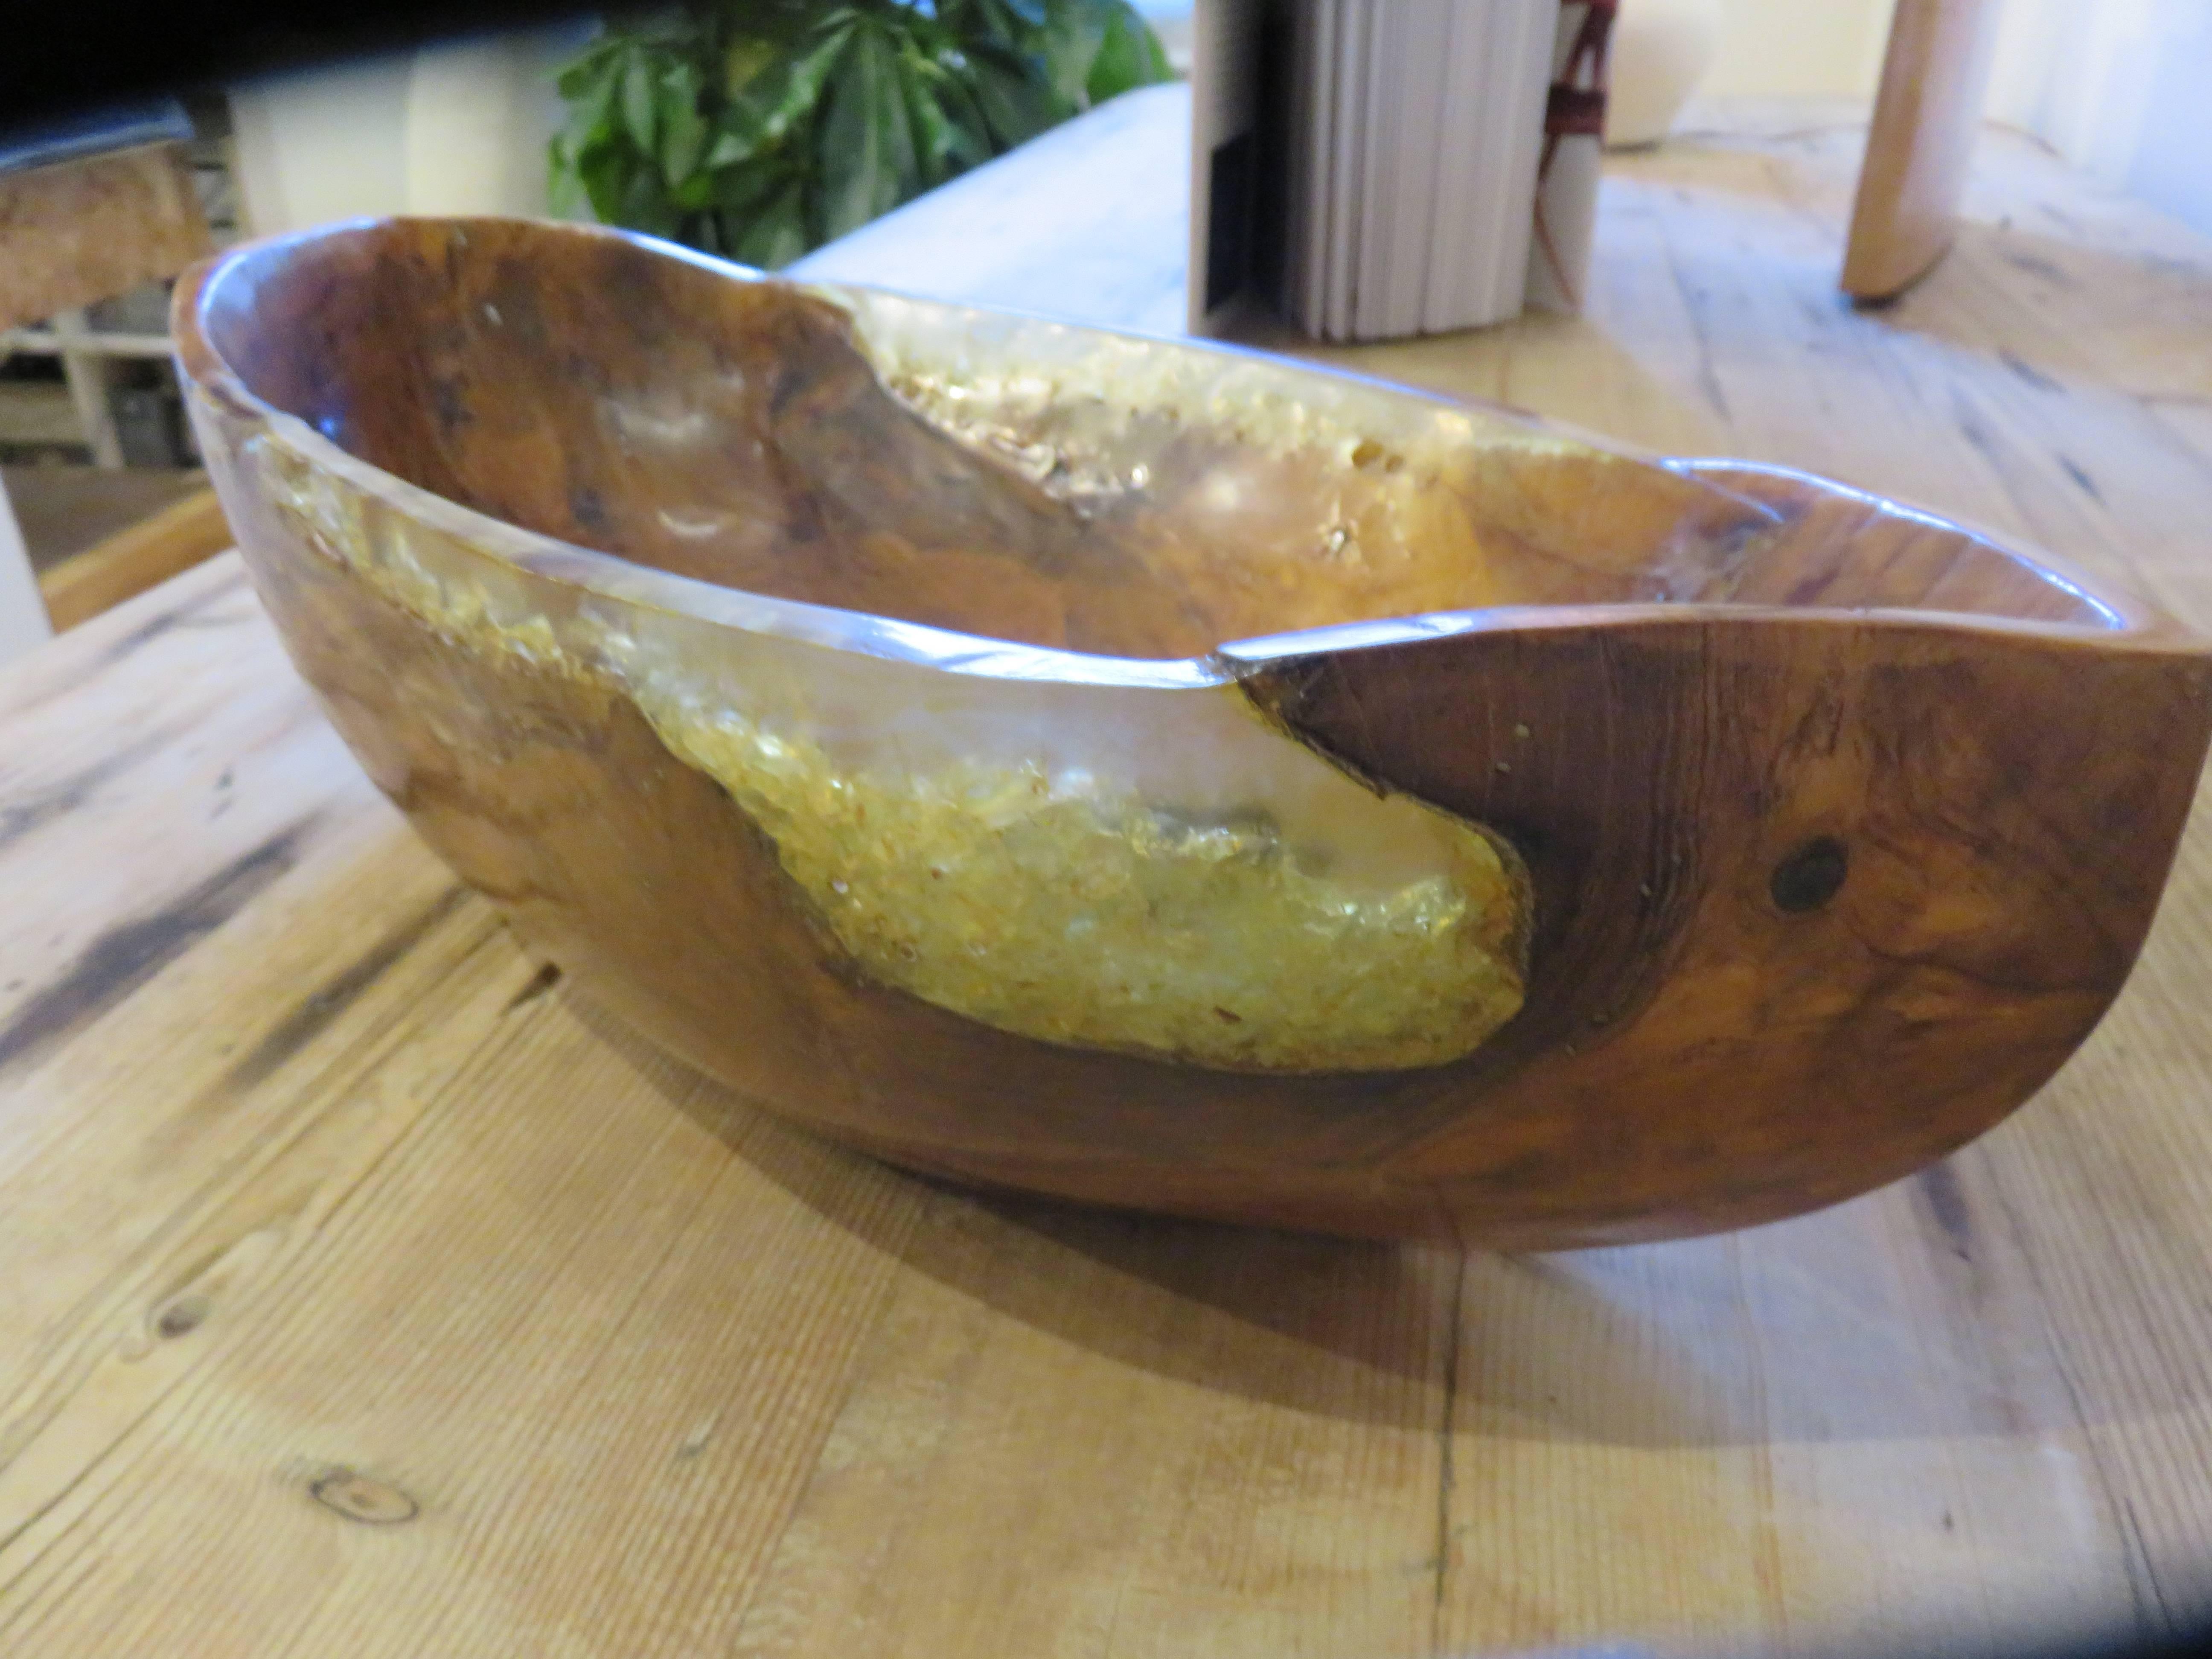 Beautifully crafted olive wood and crystallized resin vessel-bowl by Taylor Povic.